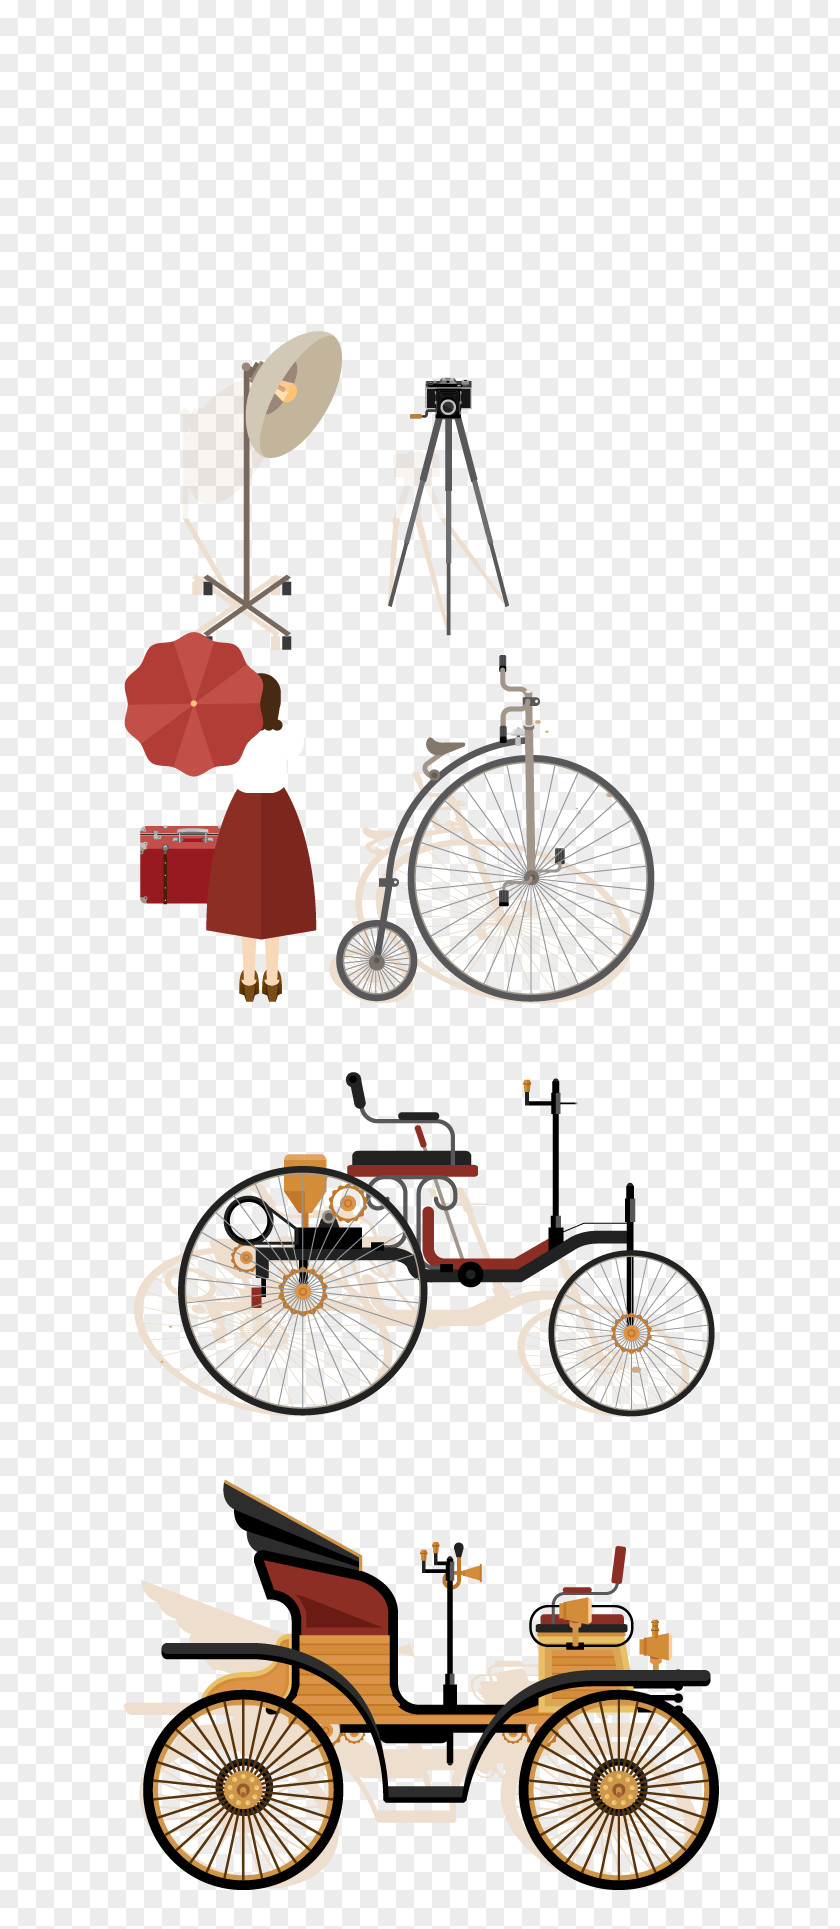 Bicycle Object Clip Art PNG